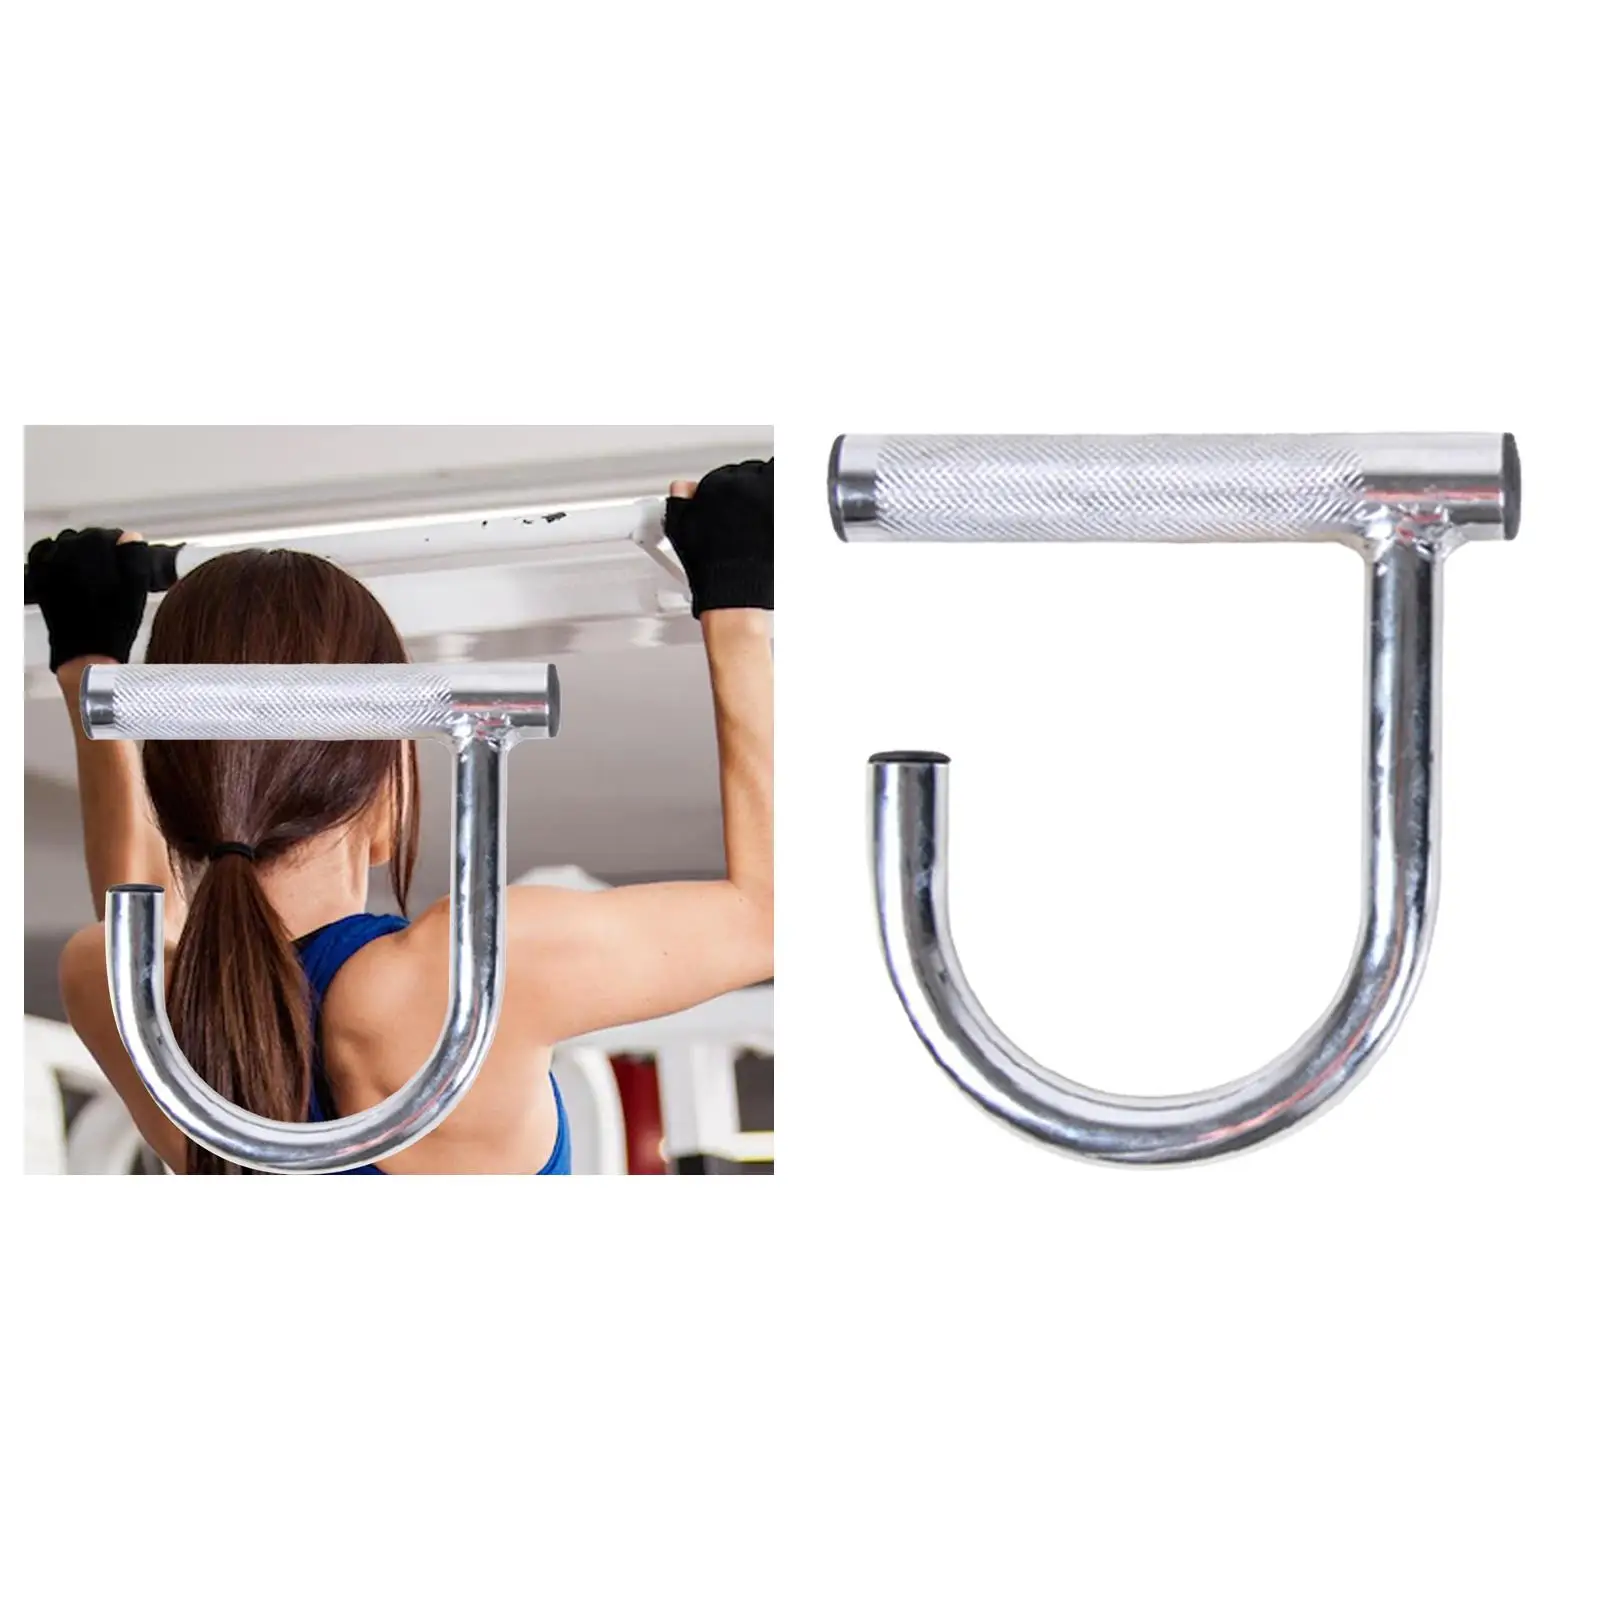 Pull Down Handle Non Slip Professional Steel Gym Handles for Weight Lifting